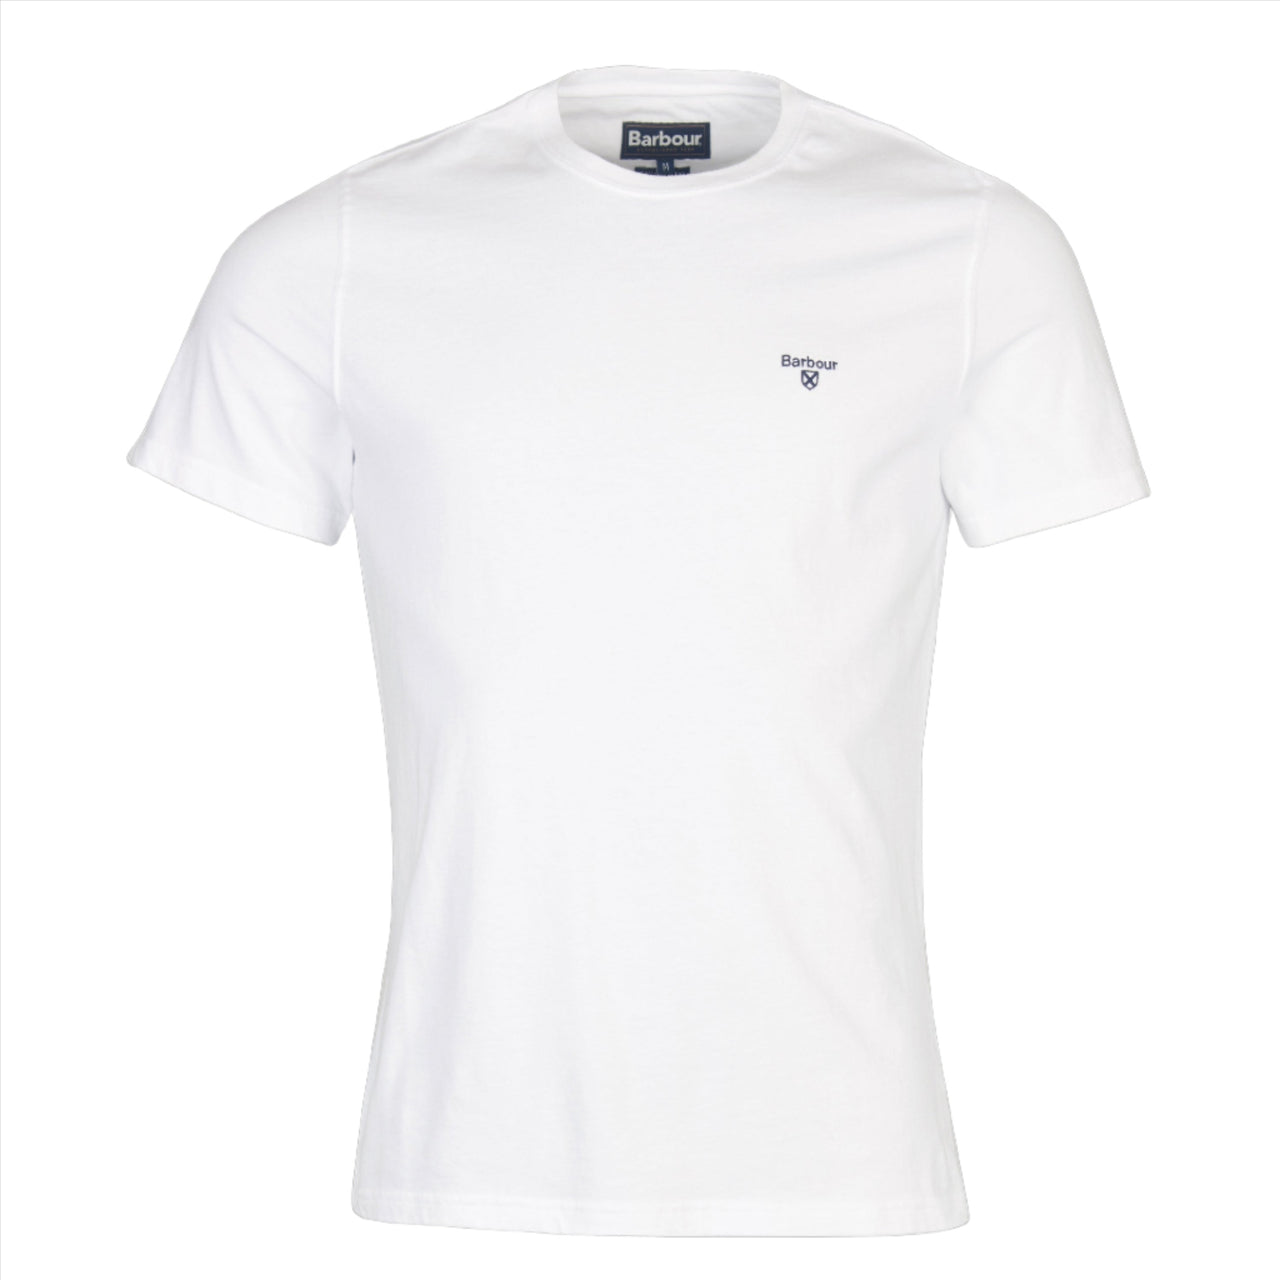 Barbour Essential Sports T-Shirt - White